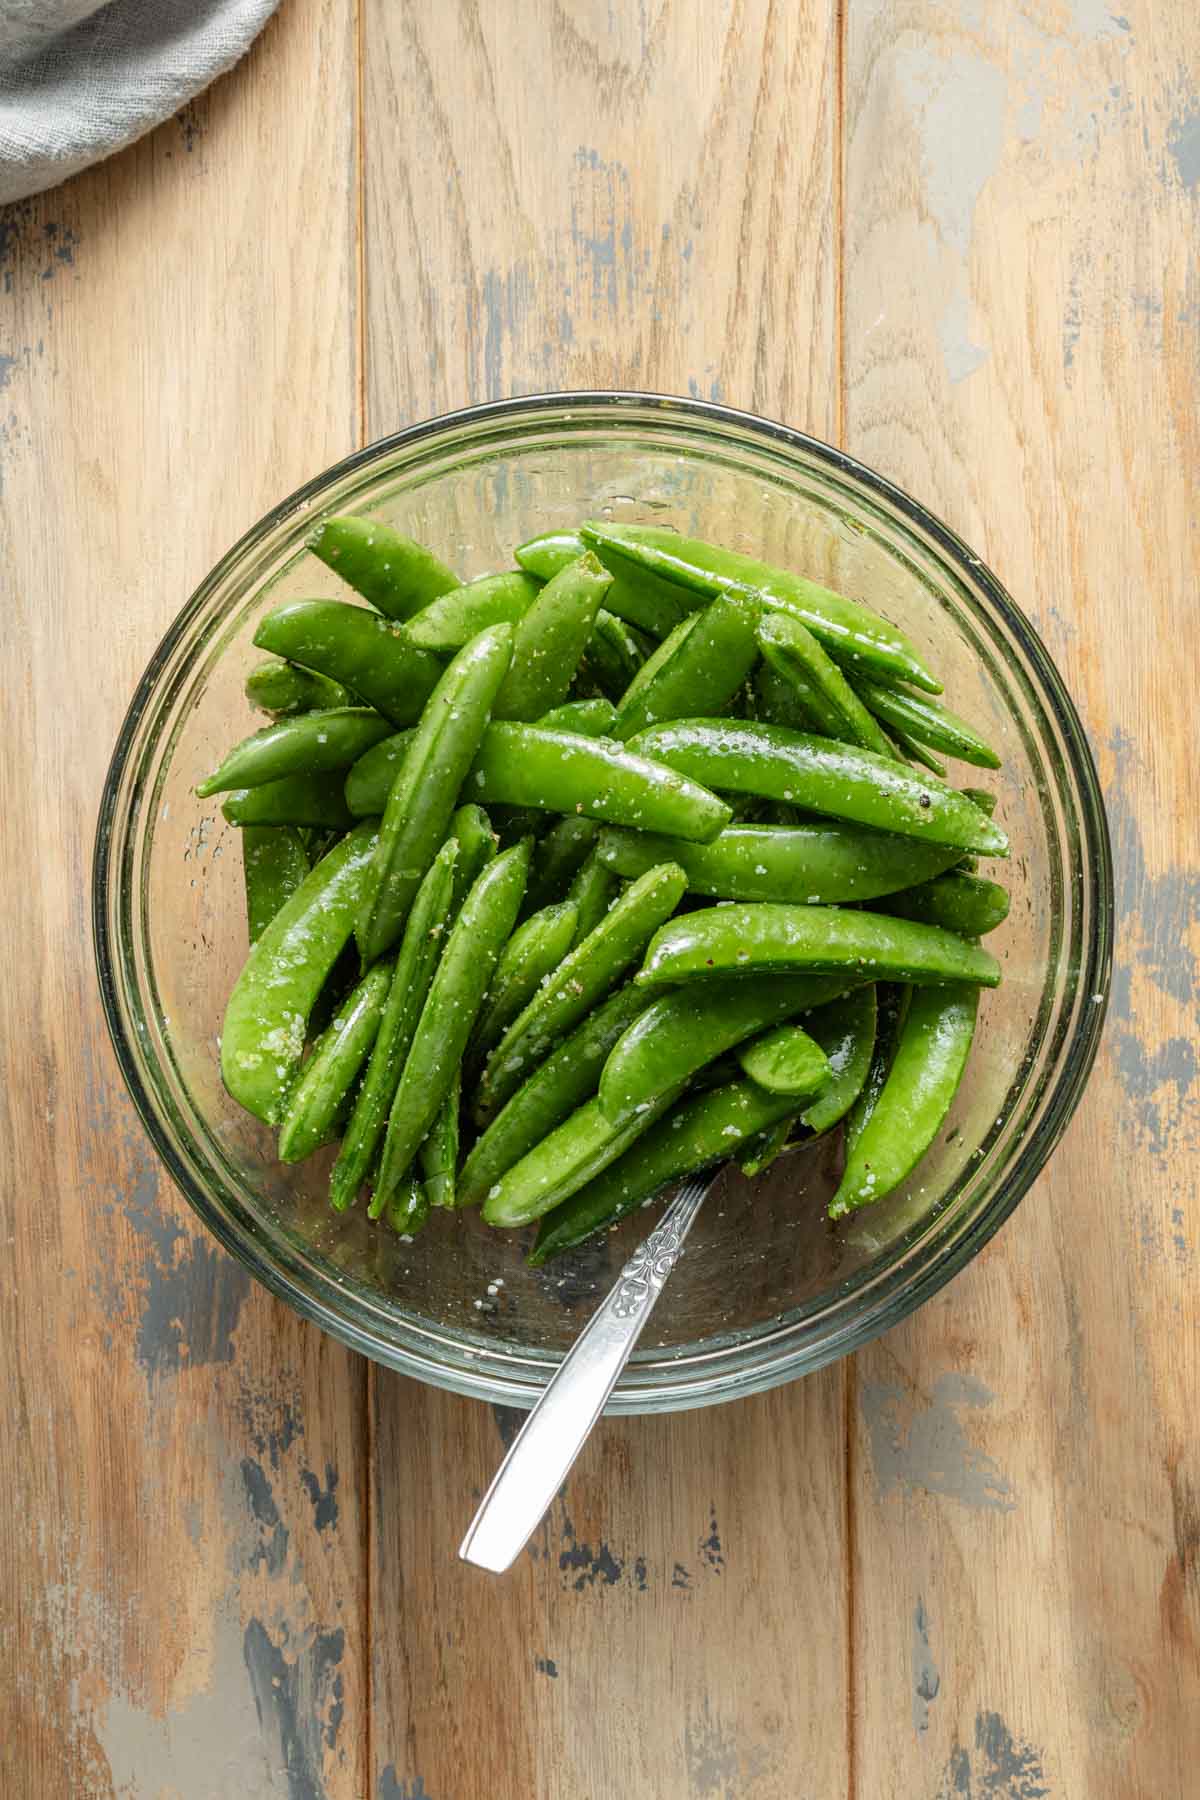 Snap peas in a glass bowl and coated with oil and seasonings.